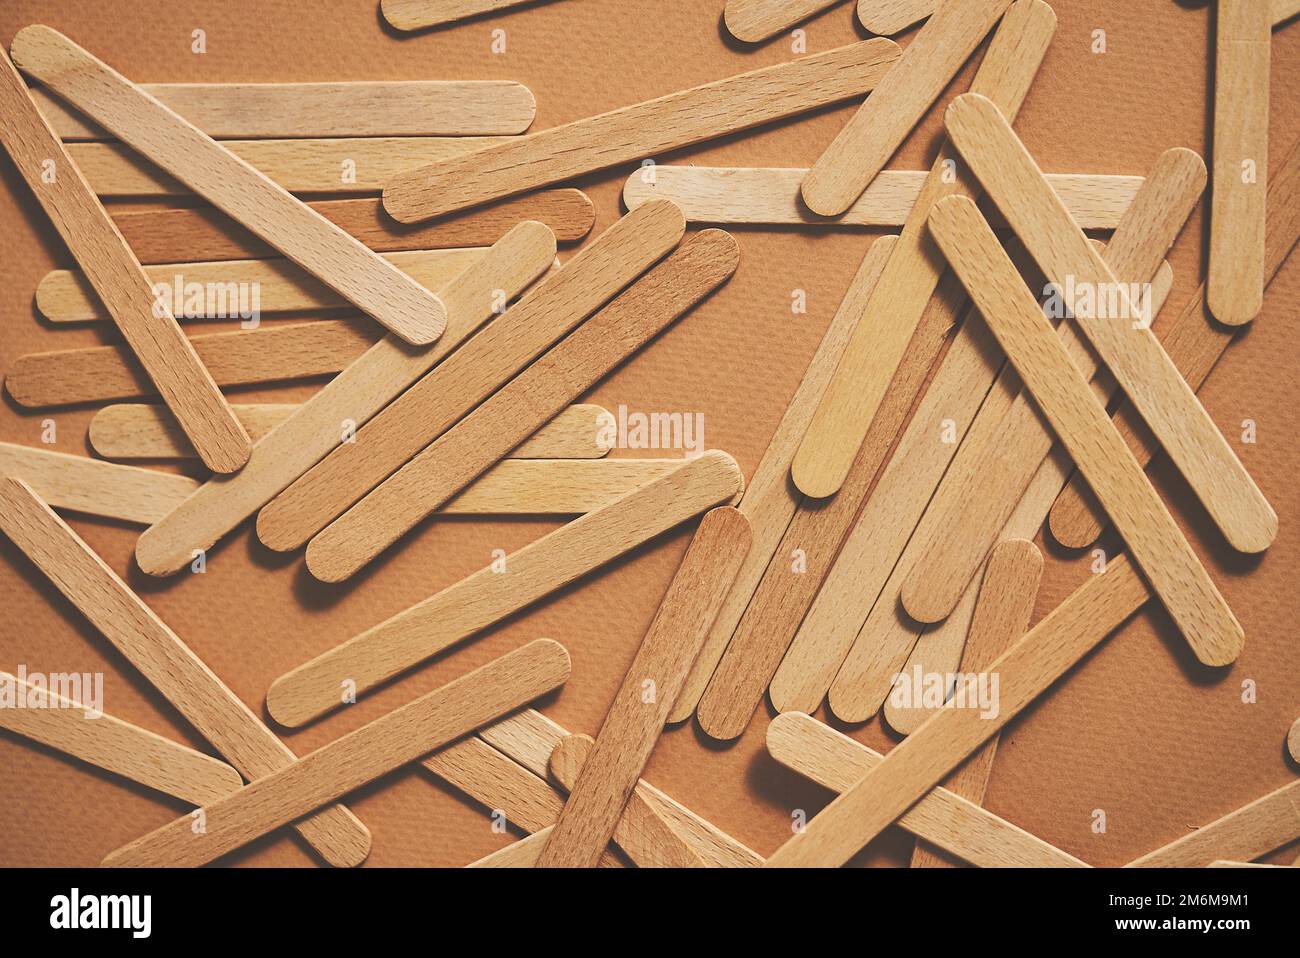 https://c8.alamy.com/comp/2M6M9M1/wooden-popsicle-sticks-scattered-on-top-of-a-beige-background-2M6M9M1.jpg